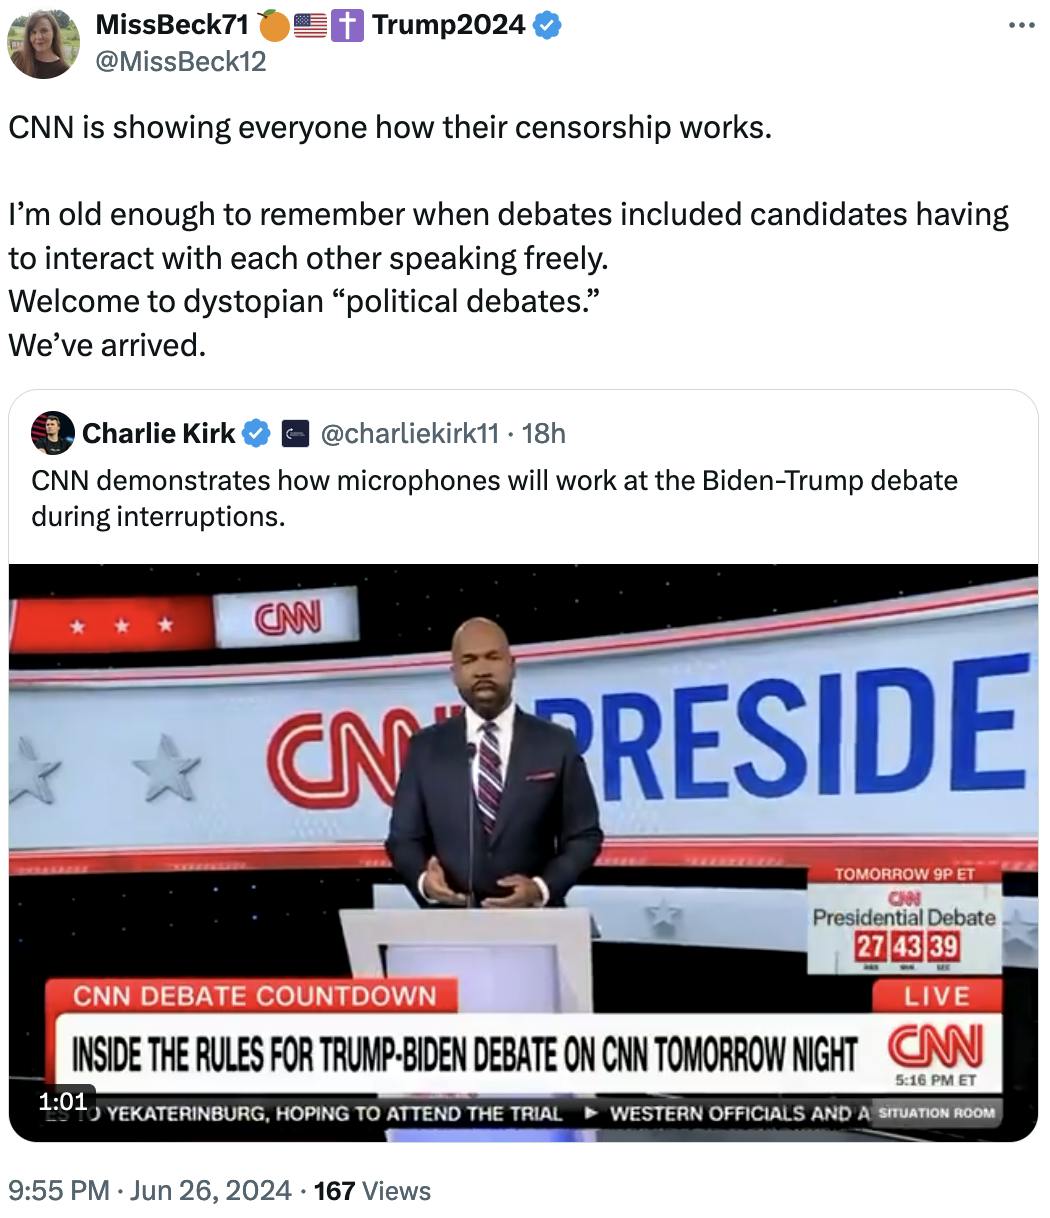 Twitter Screenshot MissBeck71 ????????????✝️ Trump2024 @MissBeck12: CNN is showing everyone how their censorship works. I’m old enough to remember when debates included candidates having to interact with each other speaking freely. Welcome to dystopian “political debates.” We’ve arrived.